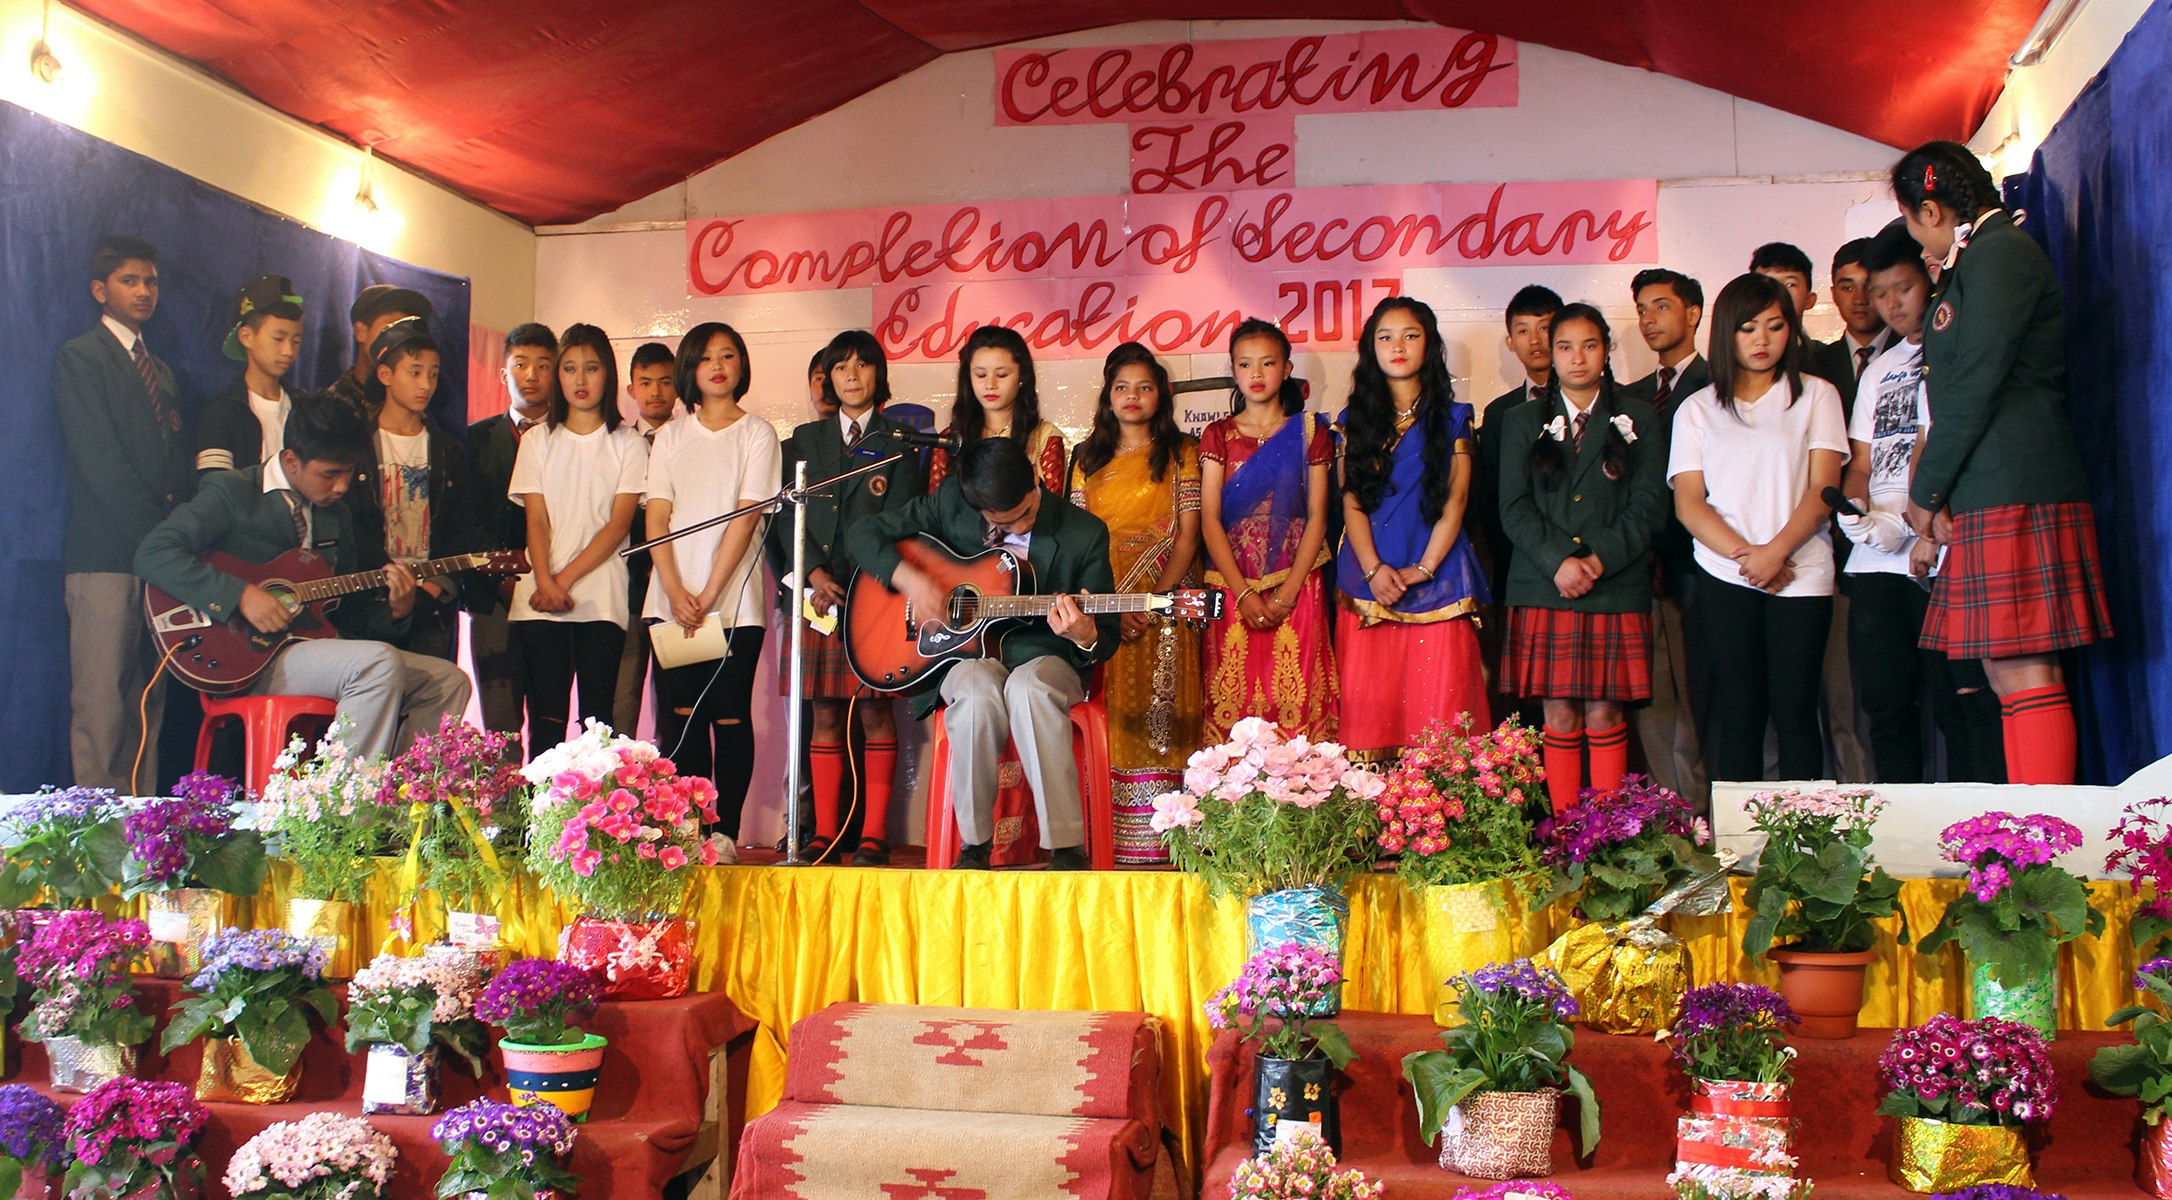 Melodies of Achievement: Students rejoice and create lasting memories as they celebrate the completion of their secondary education through heartfelt music and harmonious melodies on the grand stage.